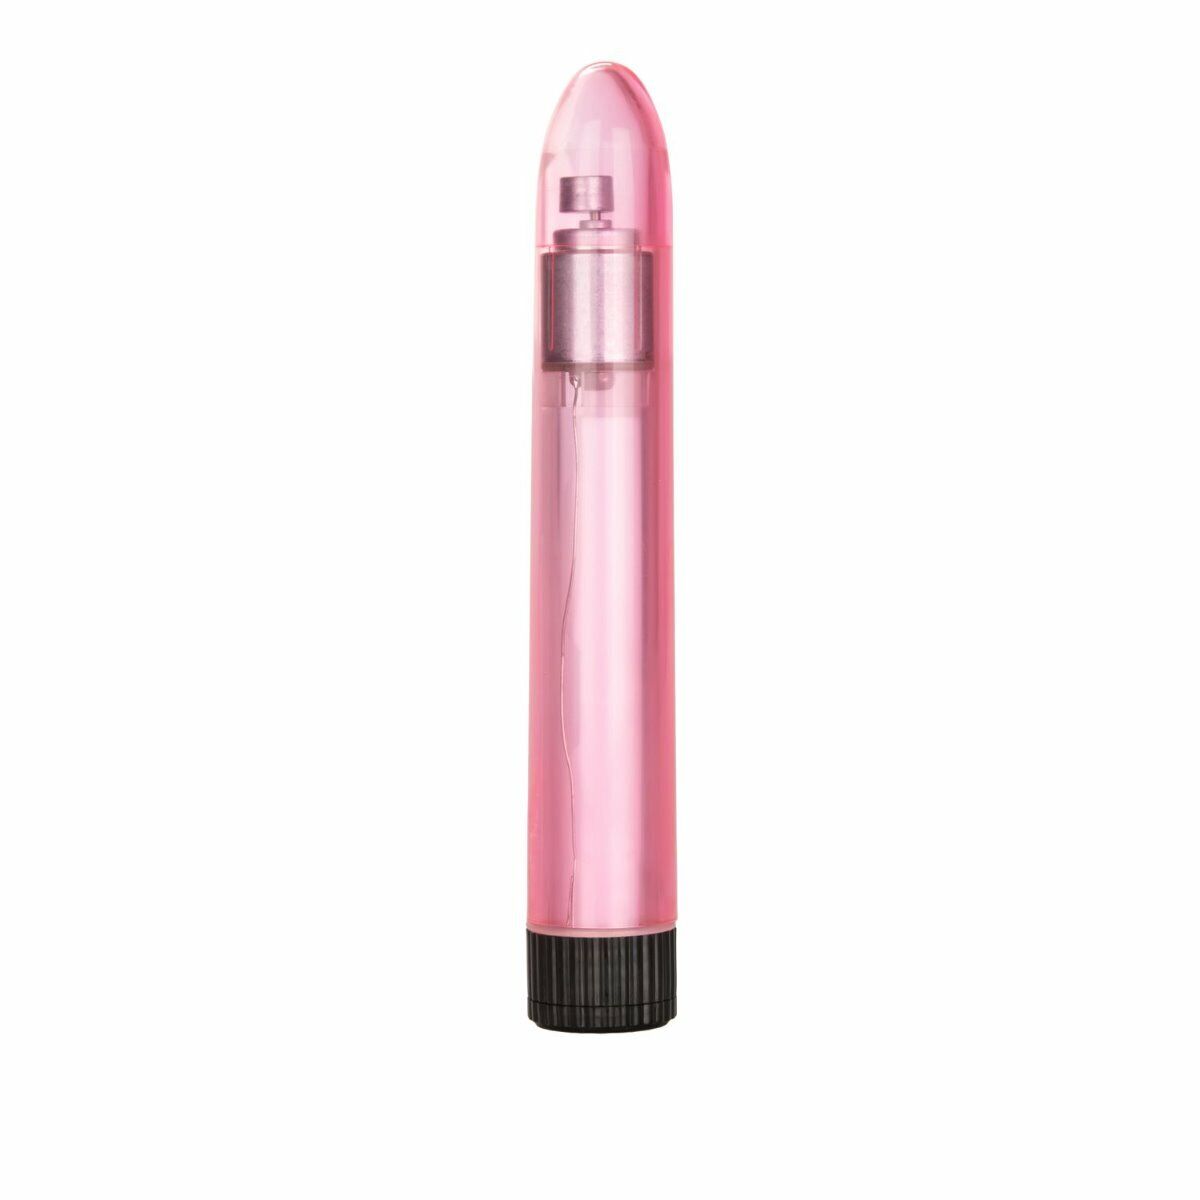 Couple Lover Sex Toy Kit Realistic Vibrator Vibe Sleeve Anal Beads Cock Ring